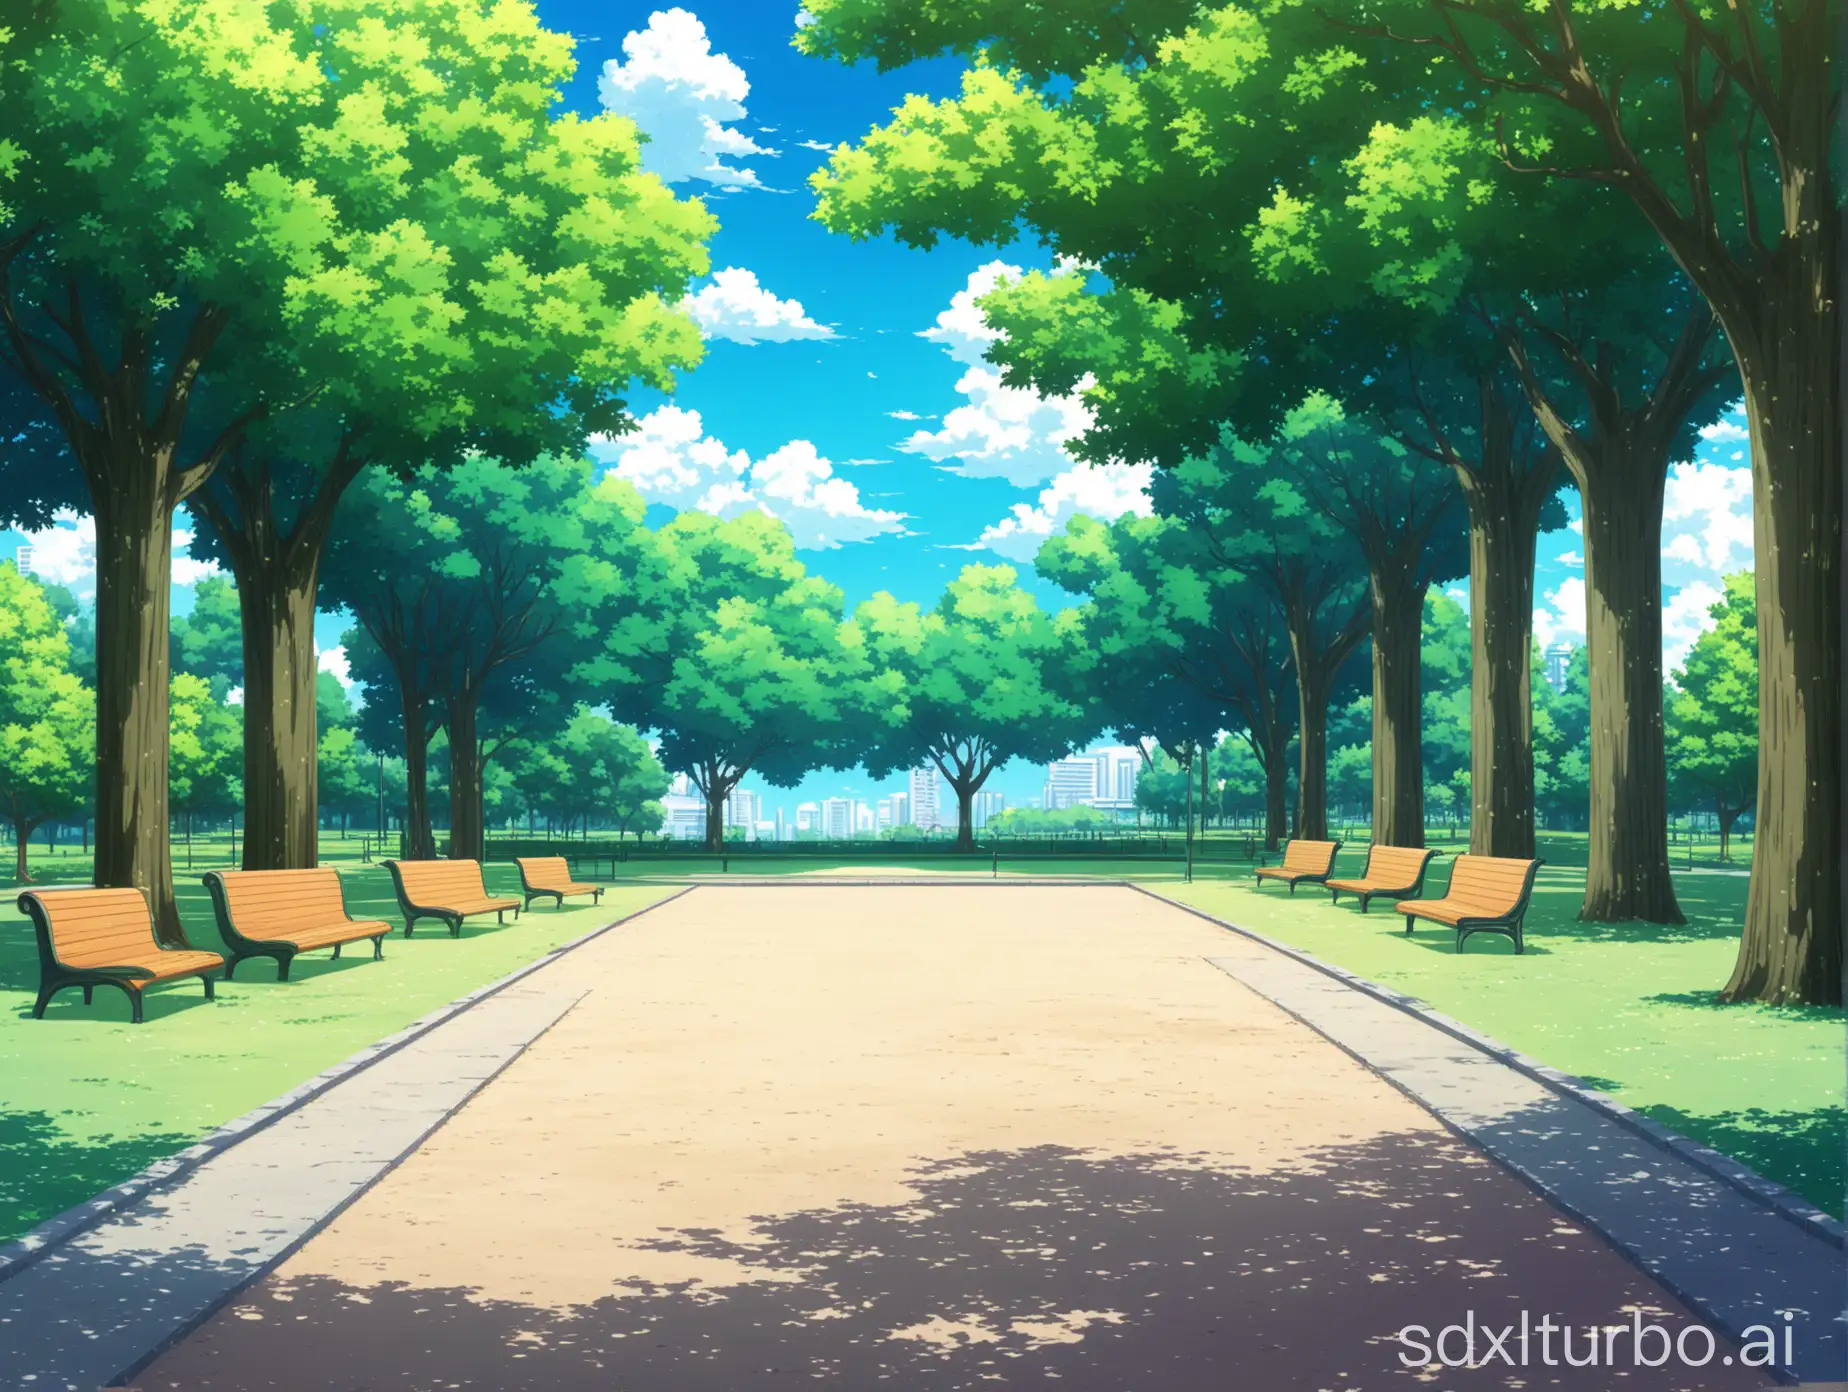 an anime background that shows a park without people during the day with trees in horizontal